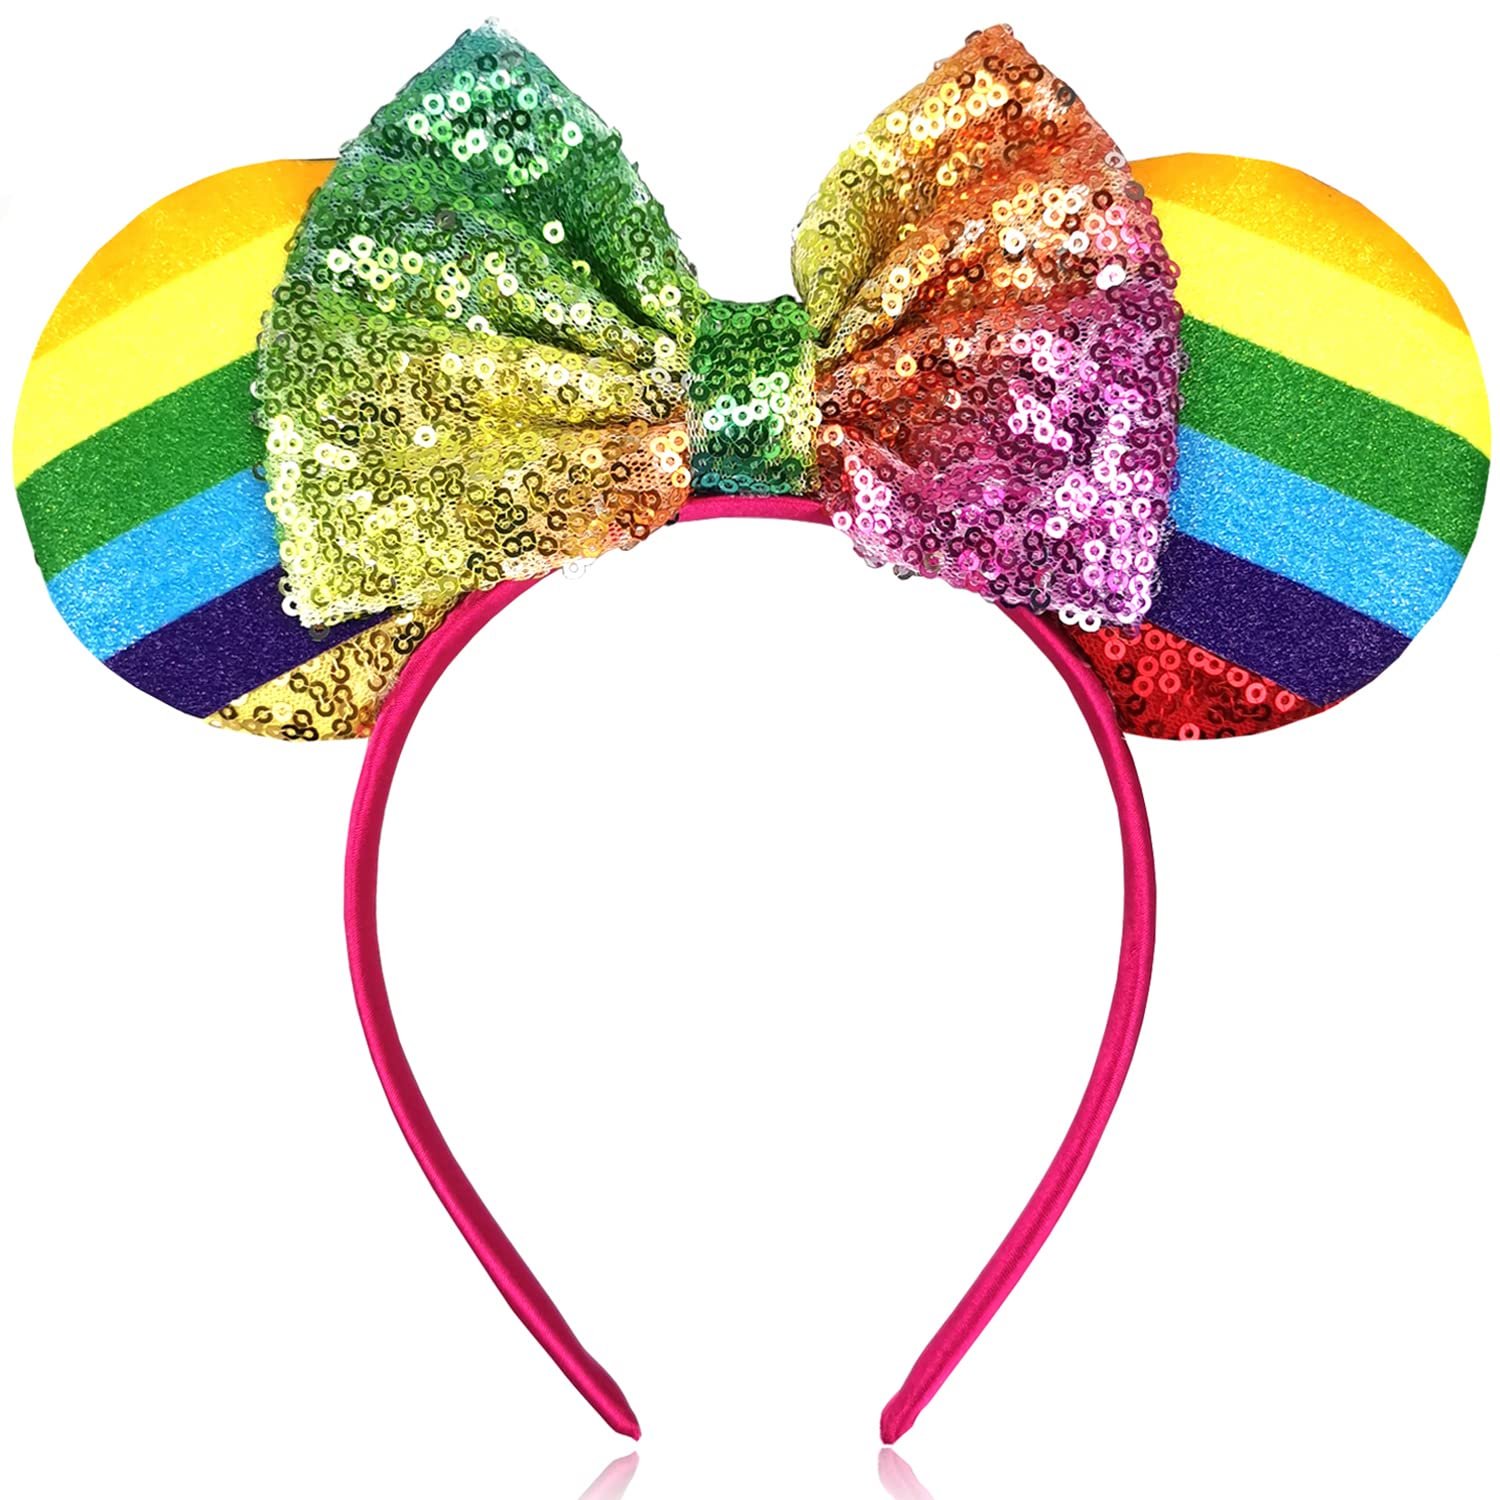 Disney Design Gay Pride Head Accessories for Pride Party Minnie Mouse ears headband